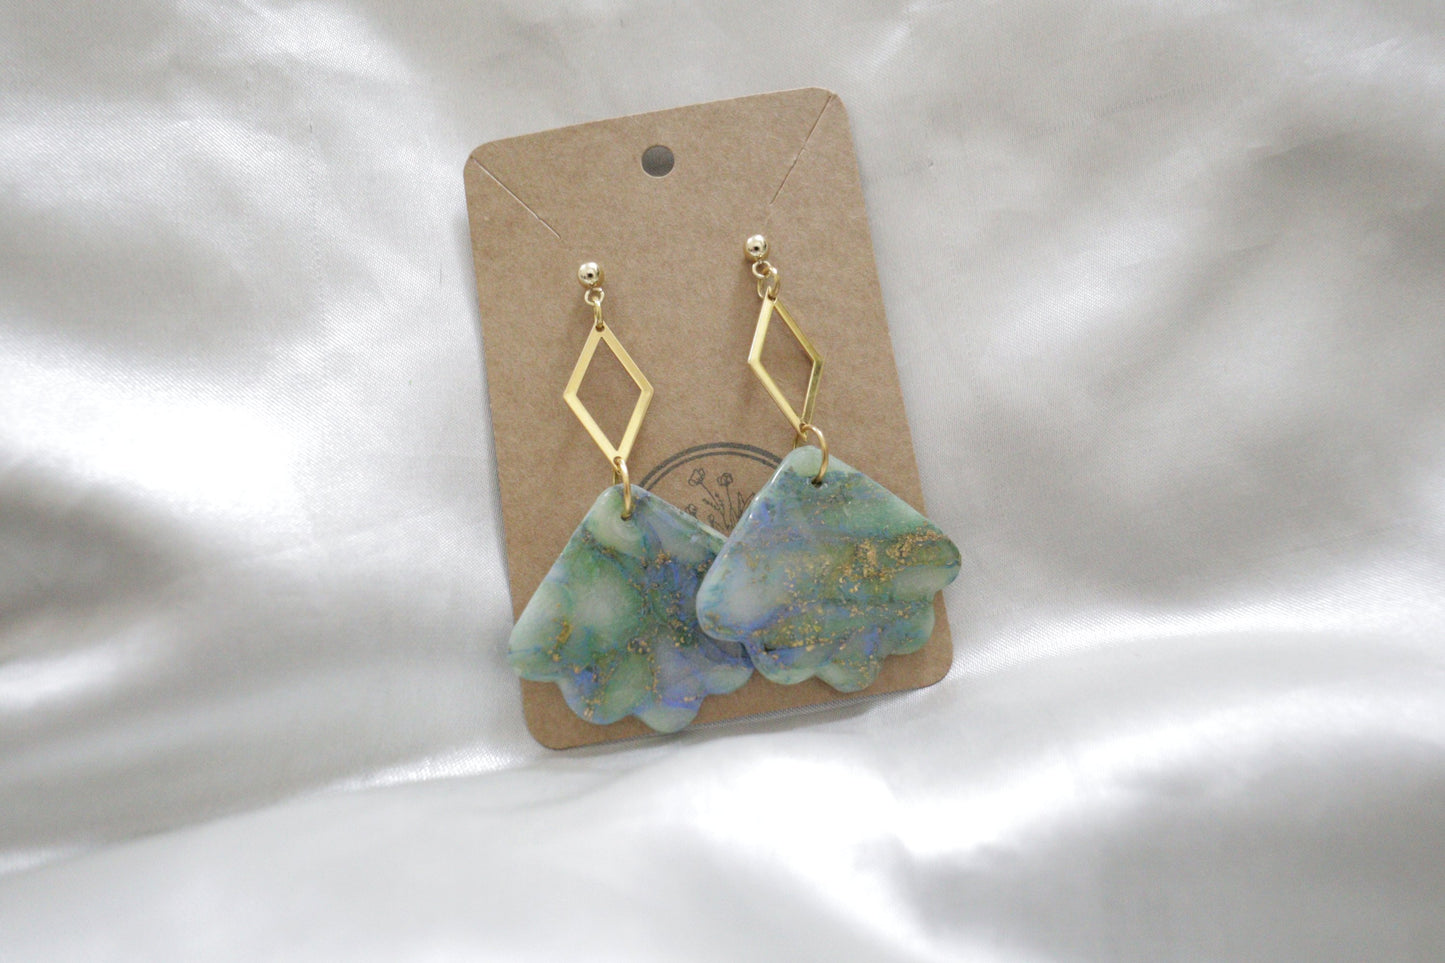 Translucent Green and Blue Polymer Clay Earrings / Bridal Earrings